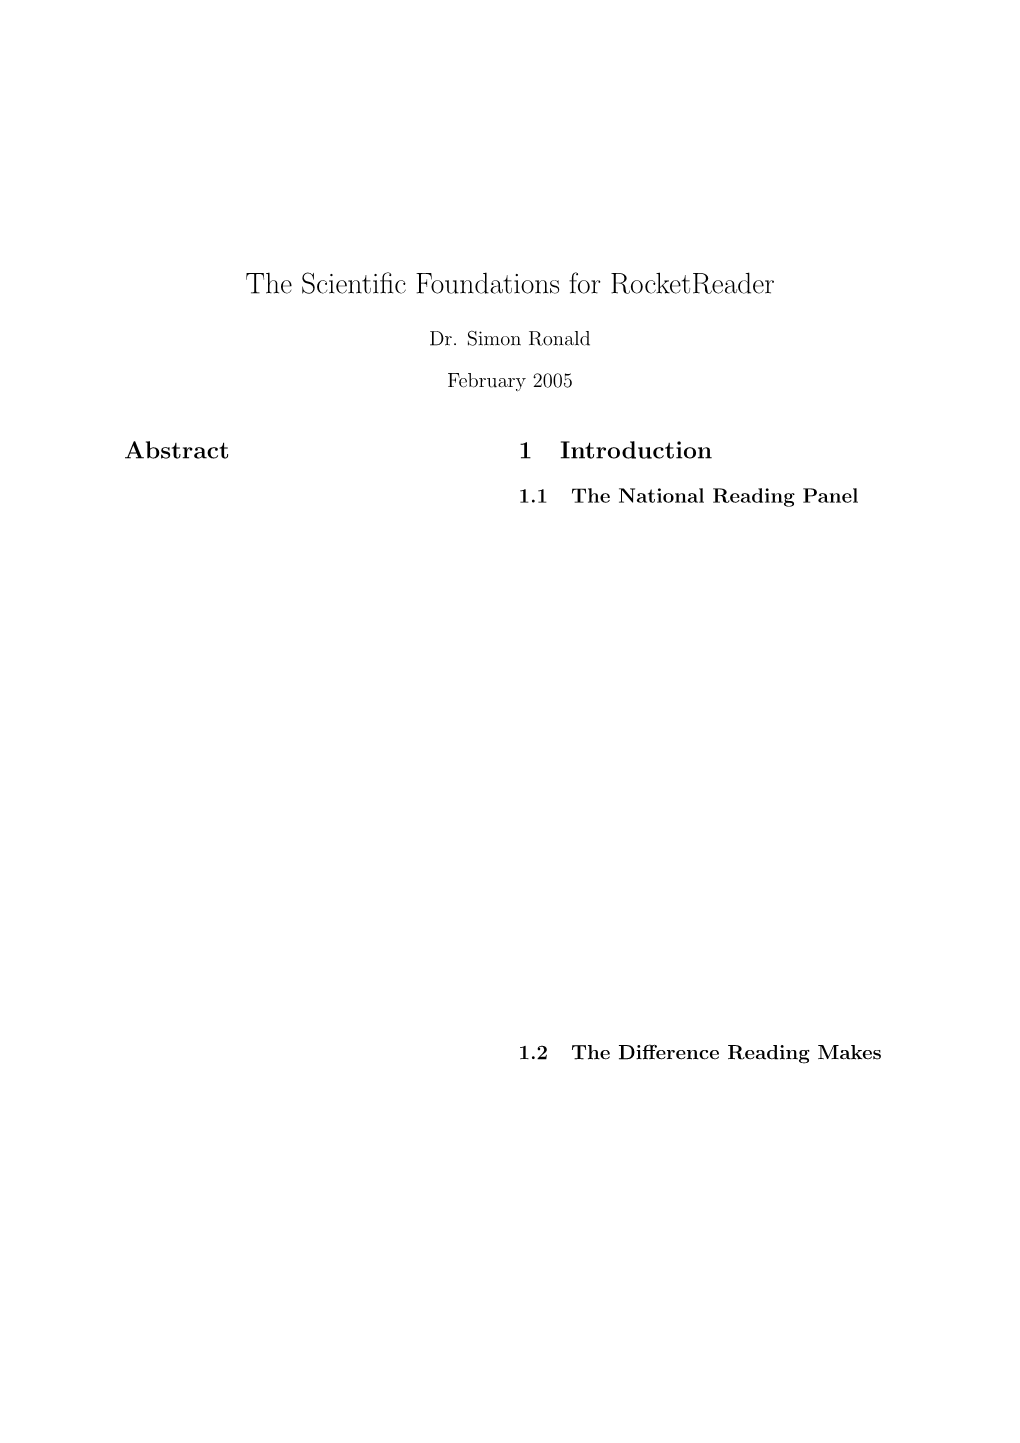 The Scientific Foundations for Rocketreader